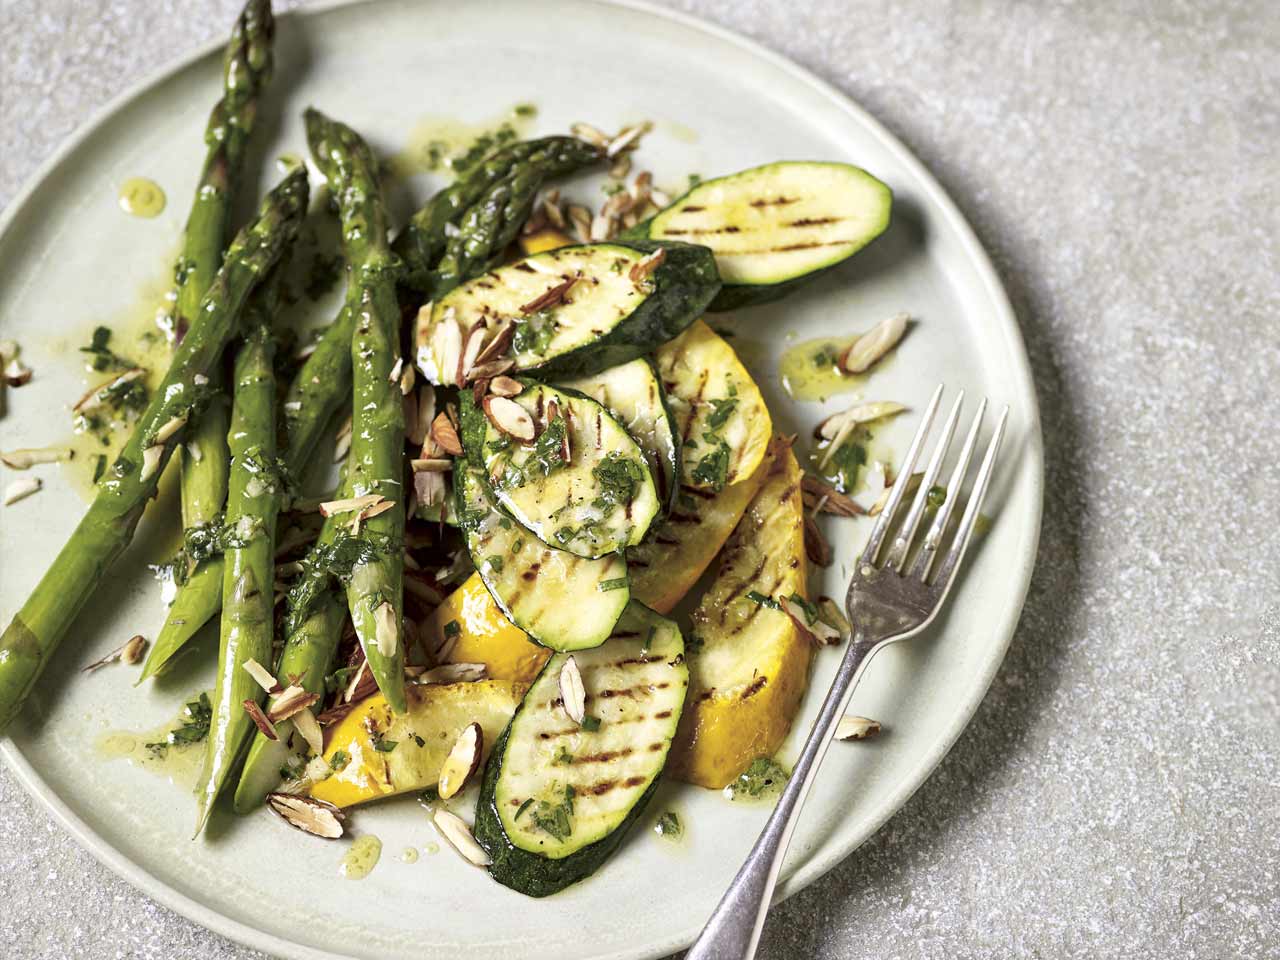 Chargrilled courgettes and asparagus with tarragon dressing